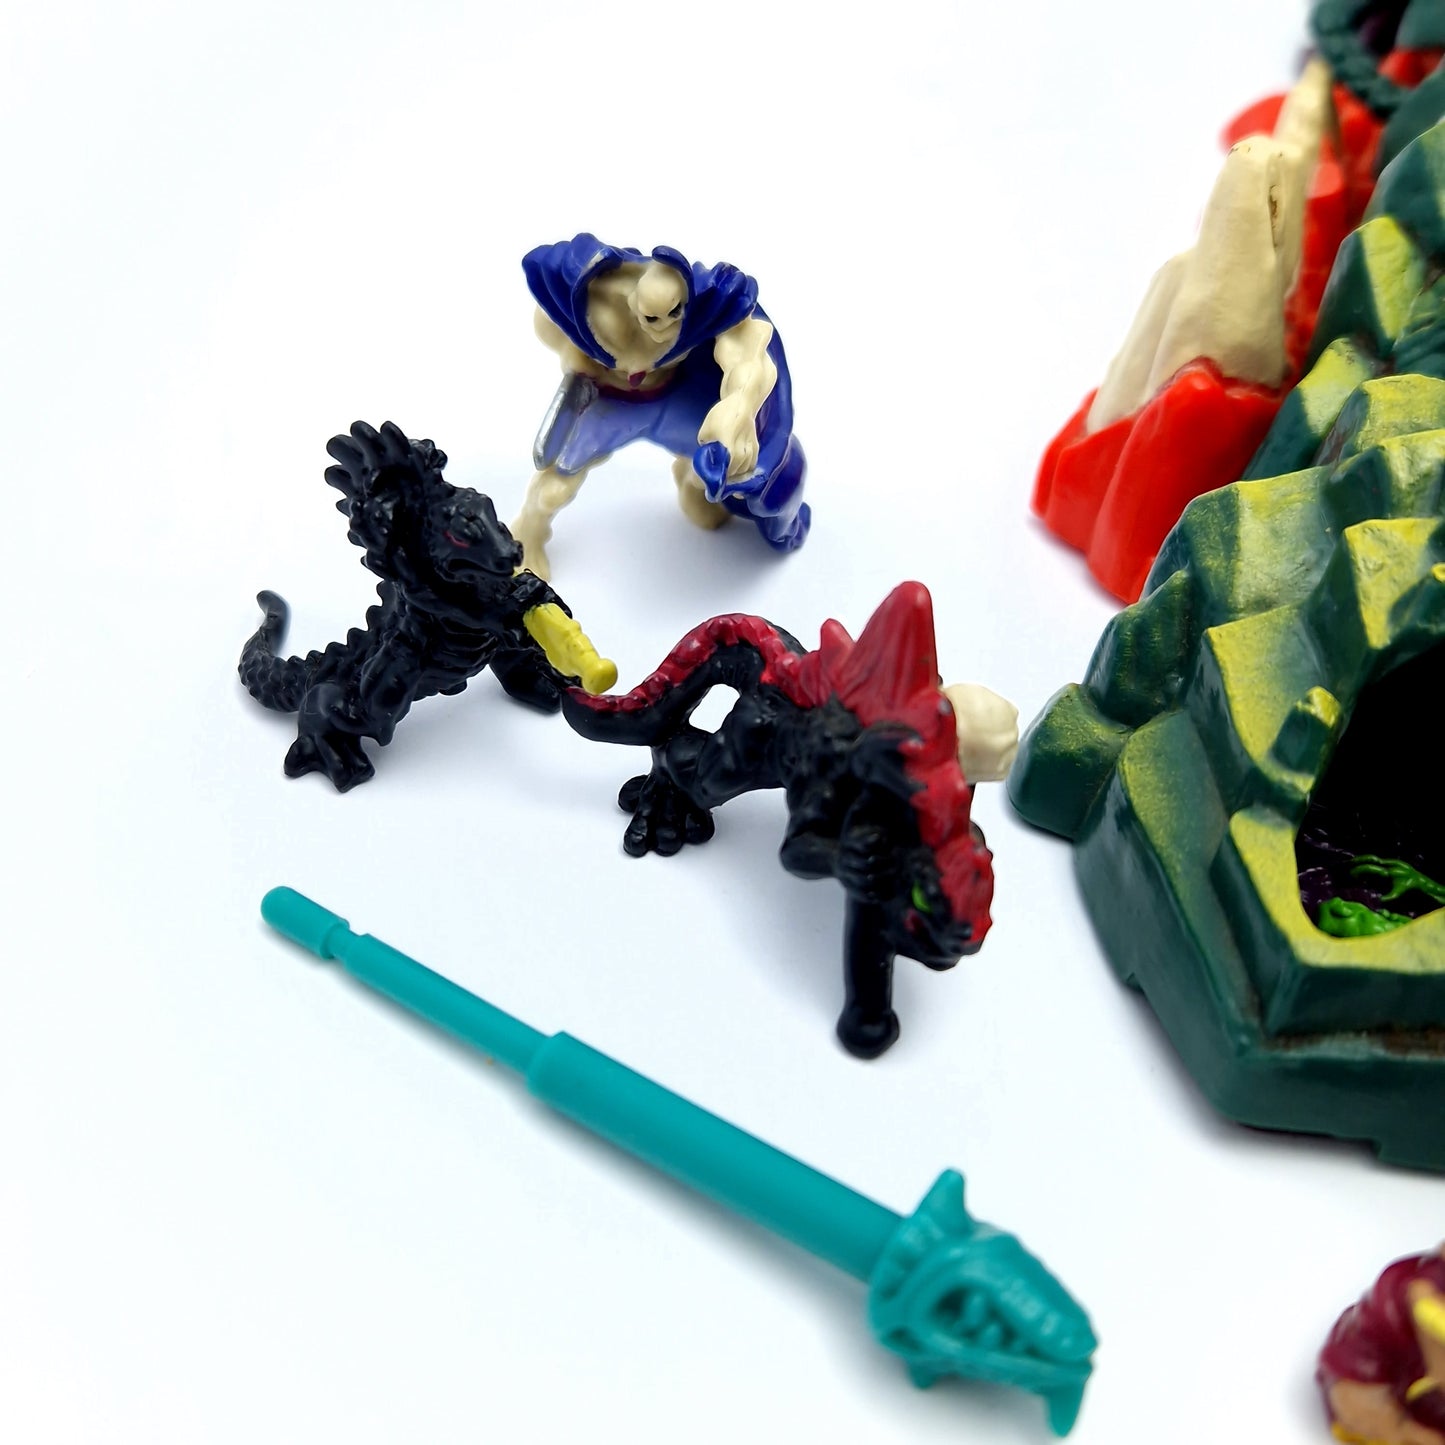 MIGHTY MAX ☆ STORMS DRAGON ISLAND Vintage Figure Playset ☆ Loose Working